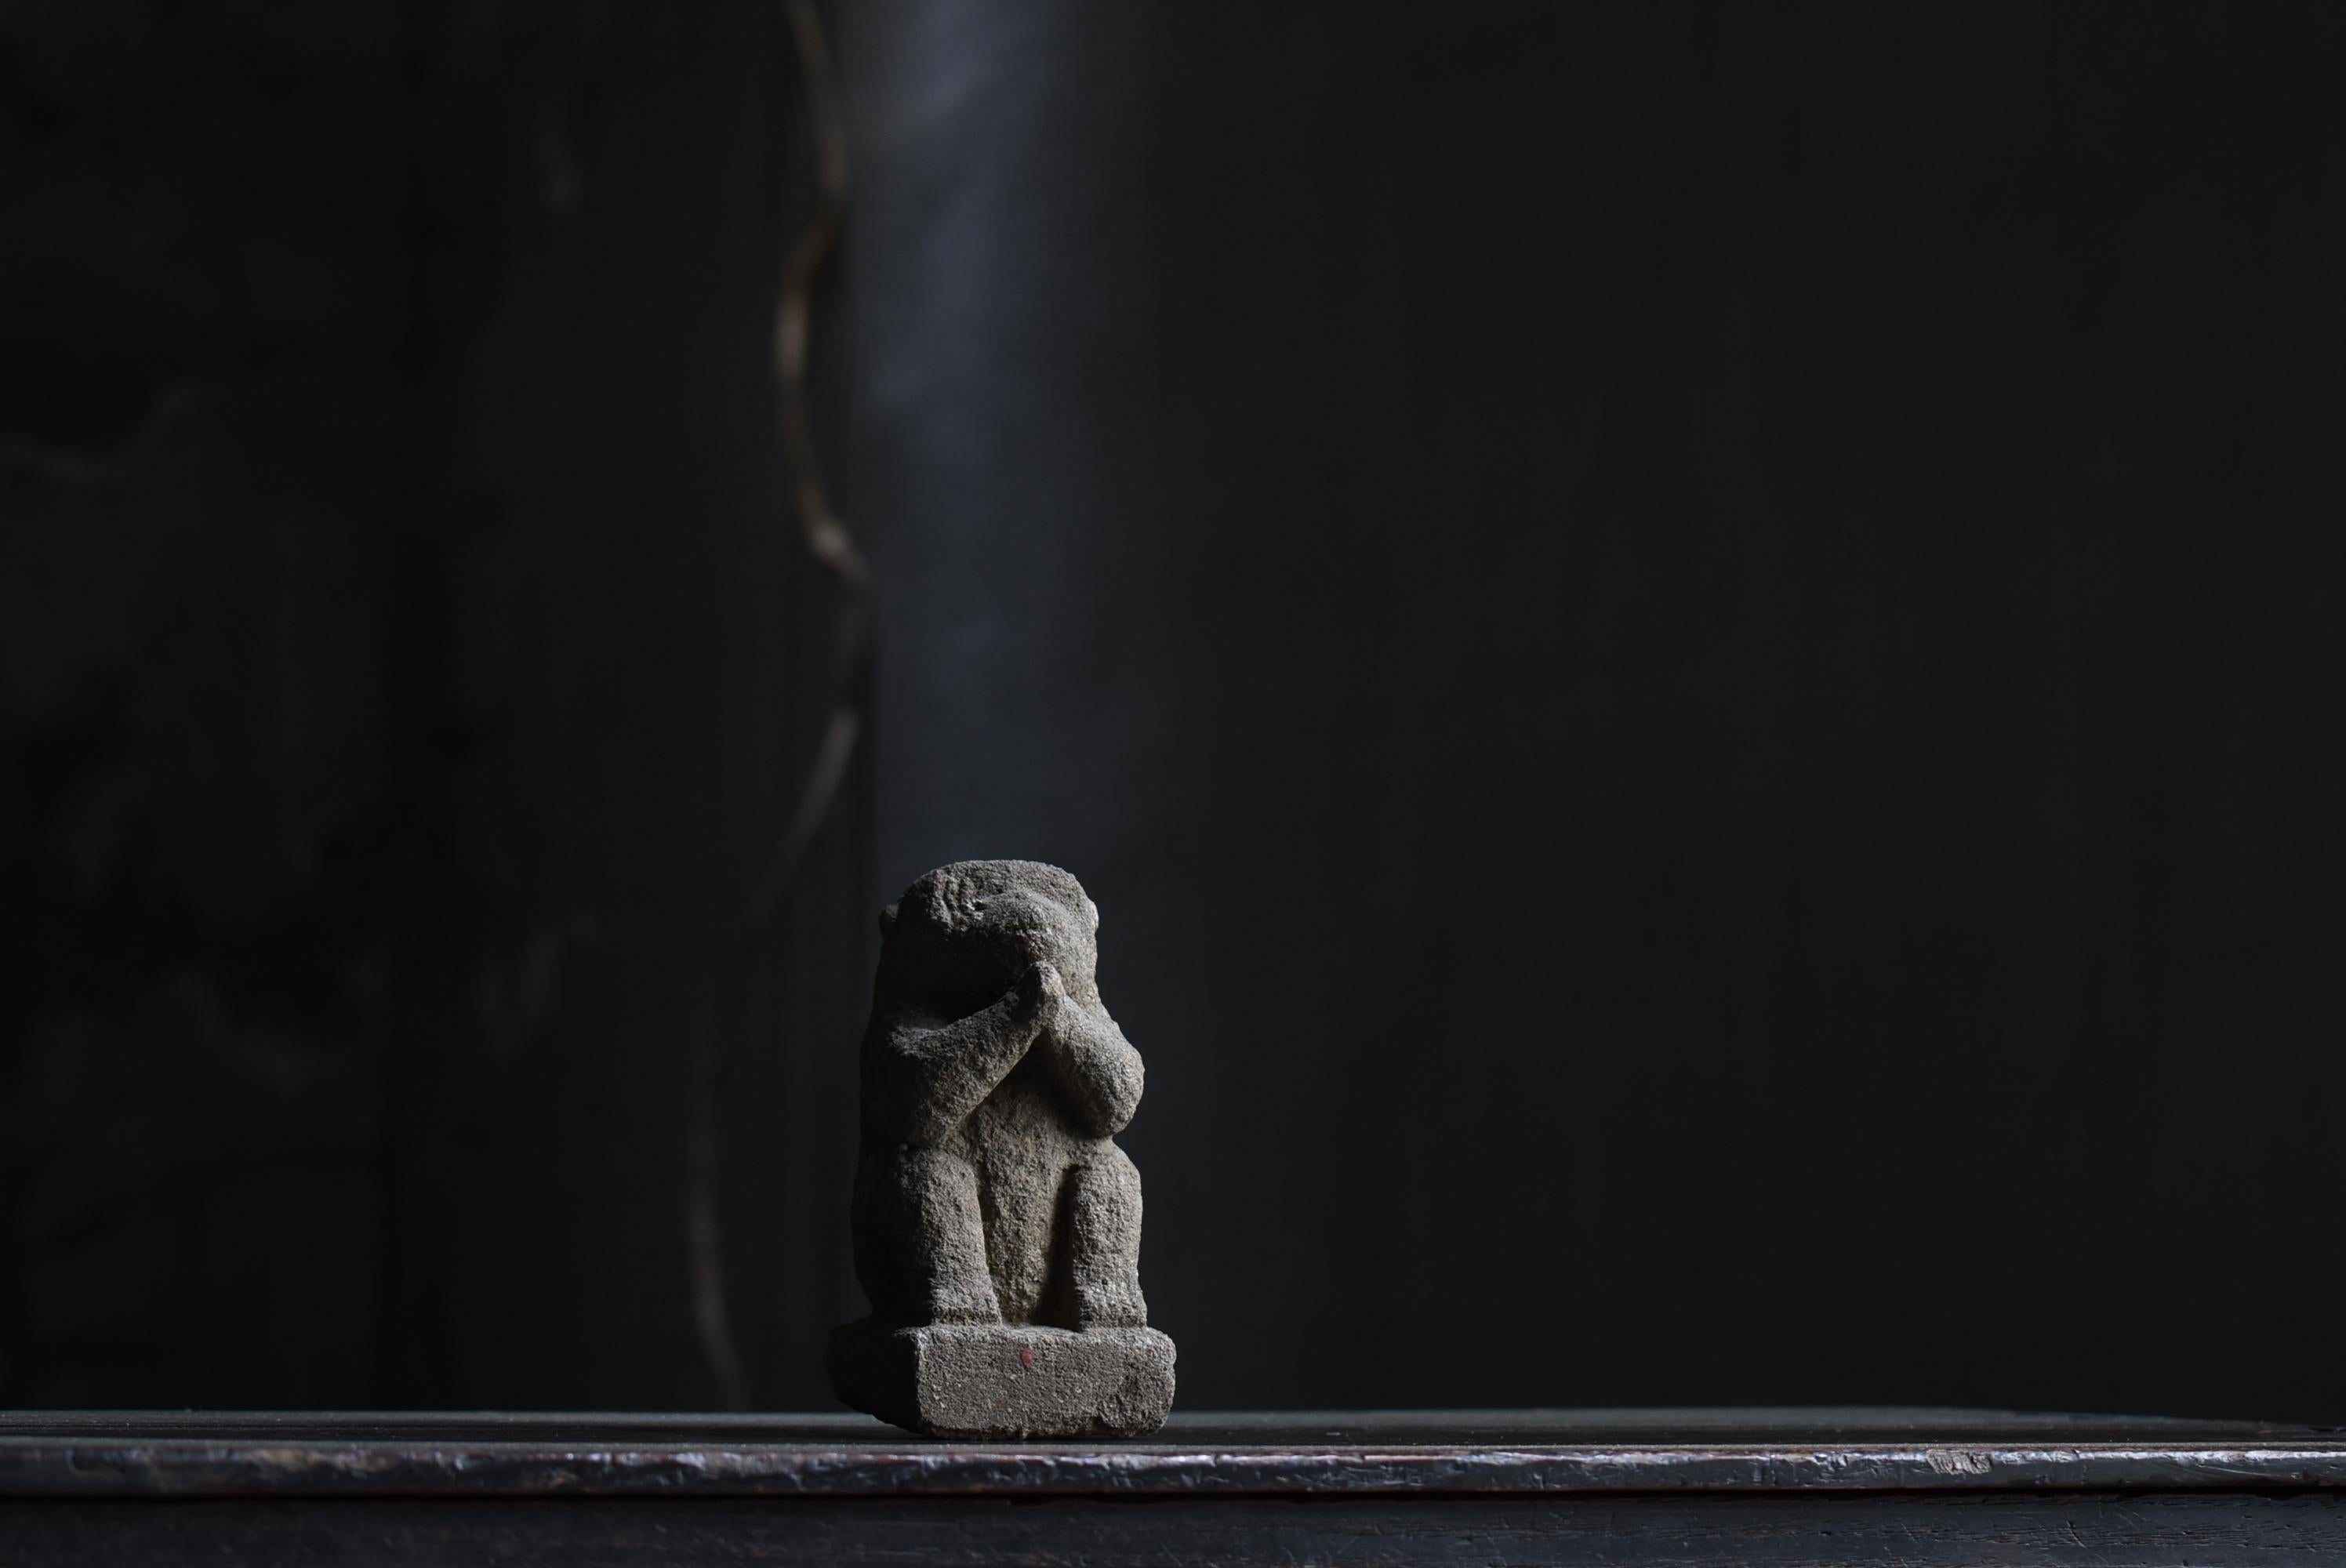 This is a very old Japanese stone carved monkey.
It was made during the Edo period (1800s-1860s).
It appears to be carved of a monkey praying.
It has been cherished as a good-luck charm.

The expression on the monkey's face seems to be